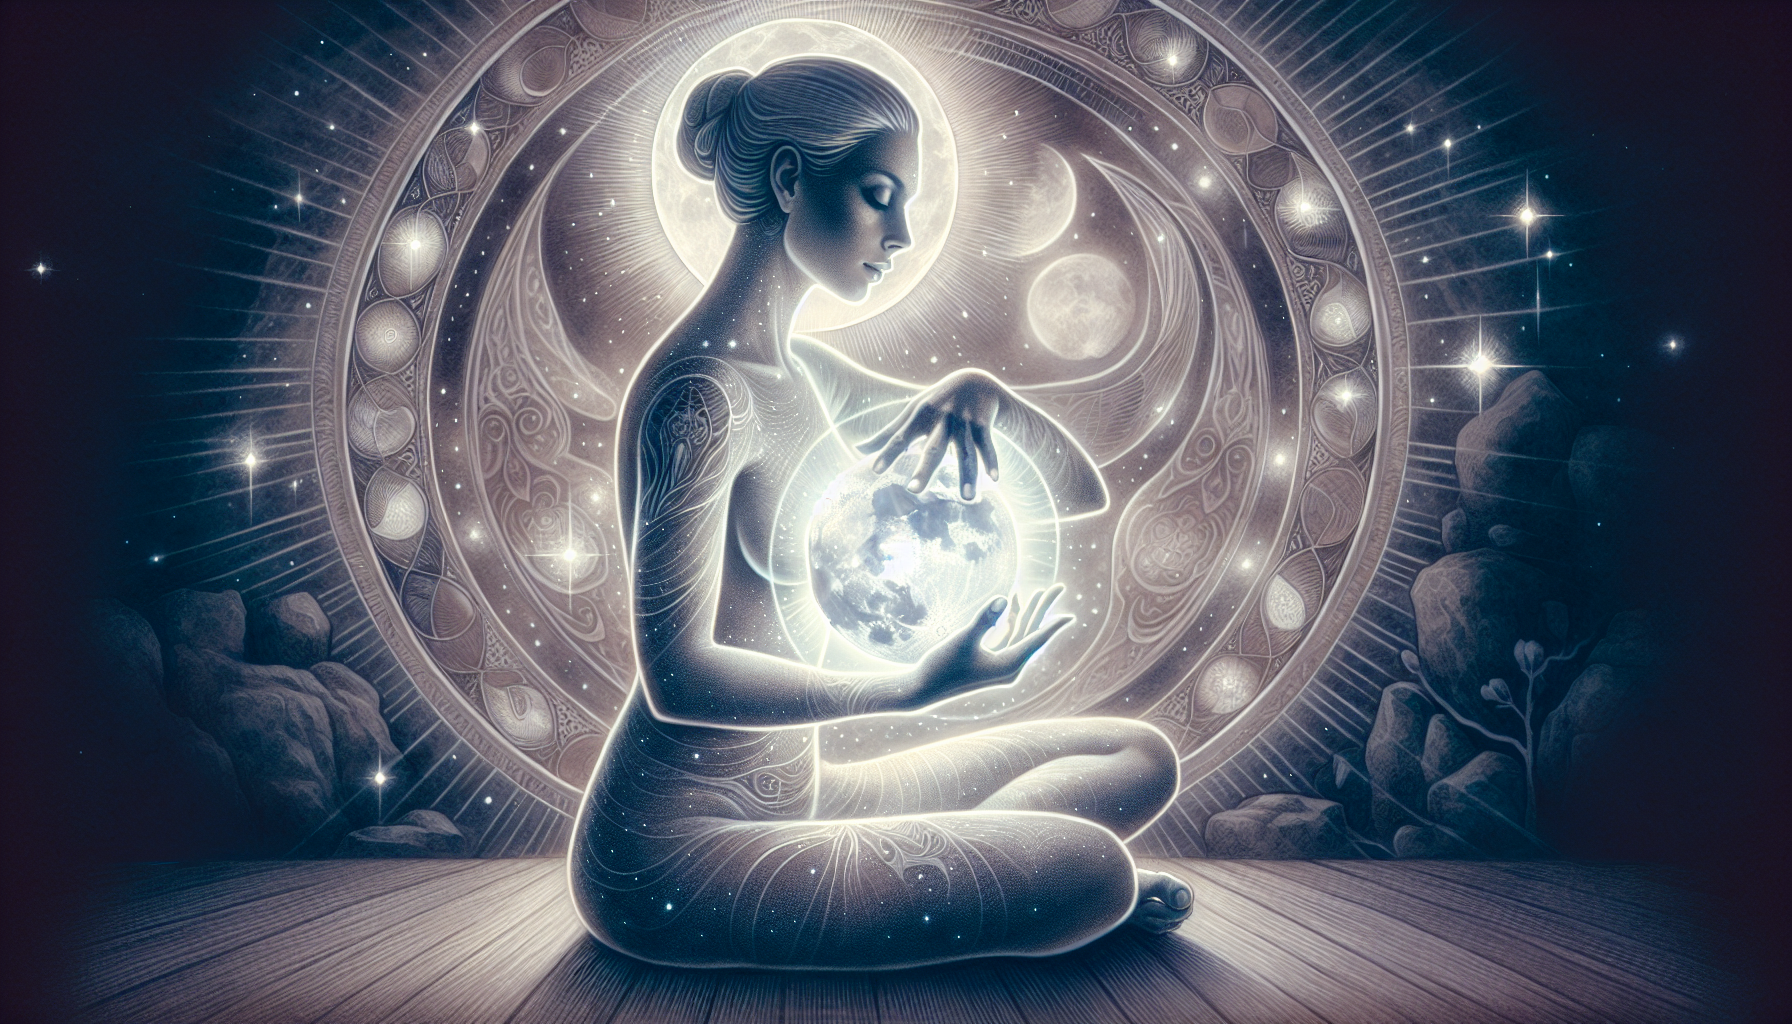 Illustration of a person meditating with moonstone in hand